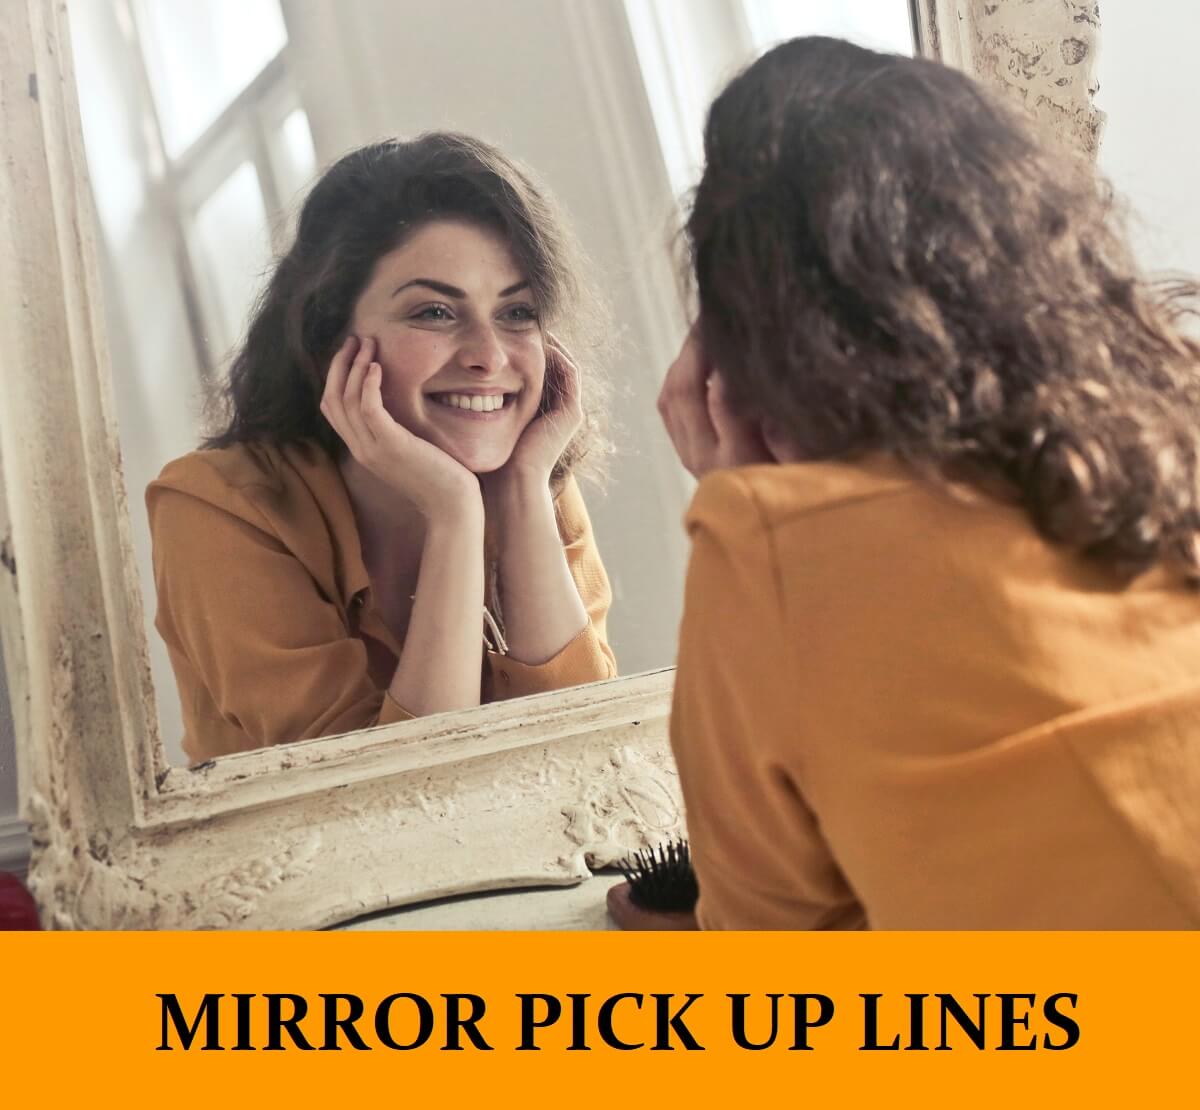 23 Mirror Pick Up Lines [Funny, Dirty, Cheesy]